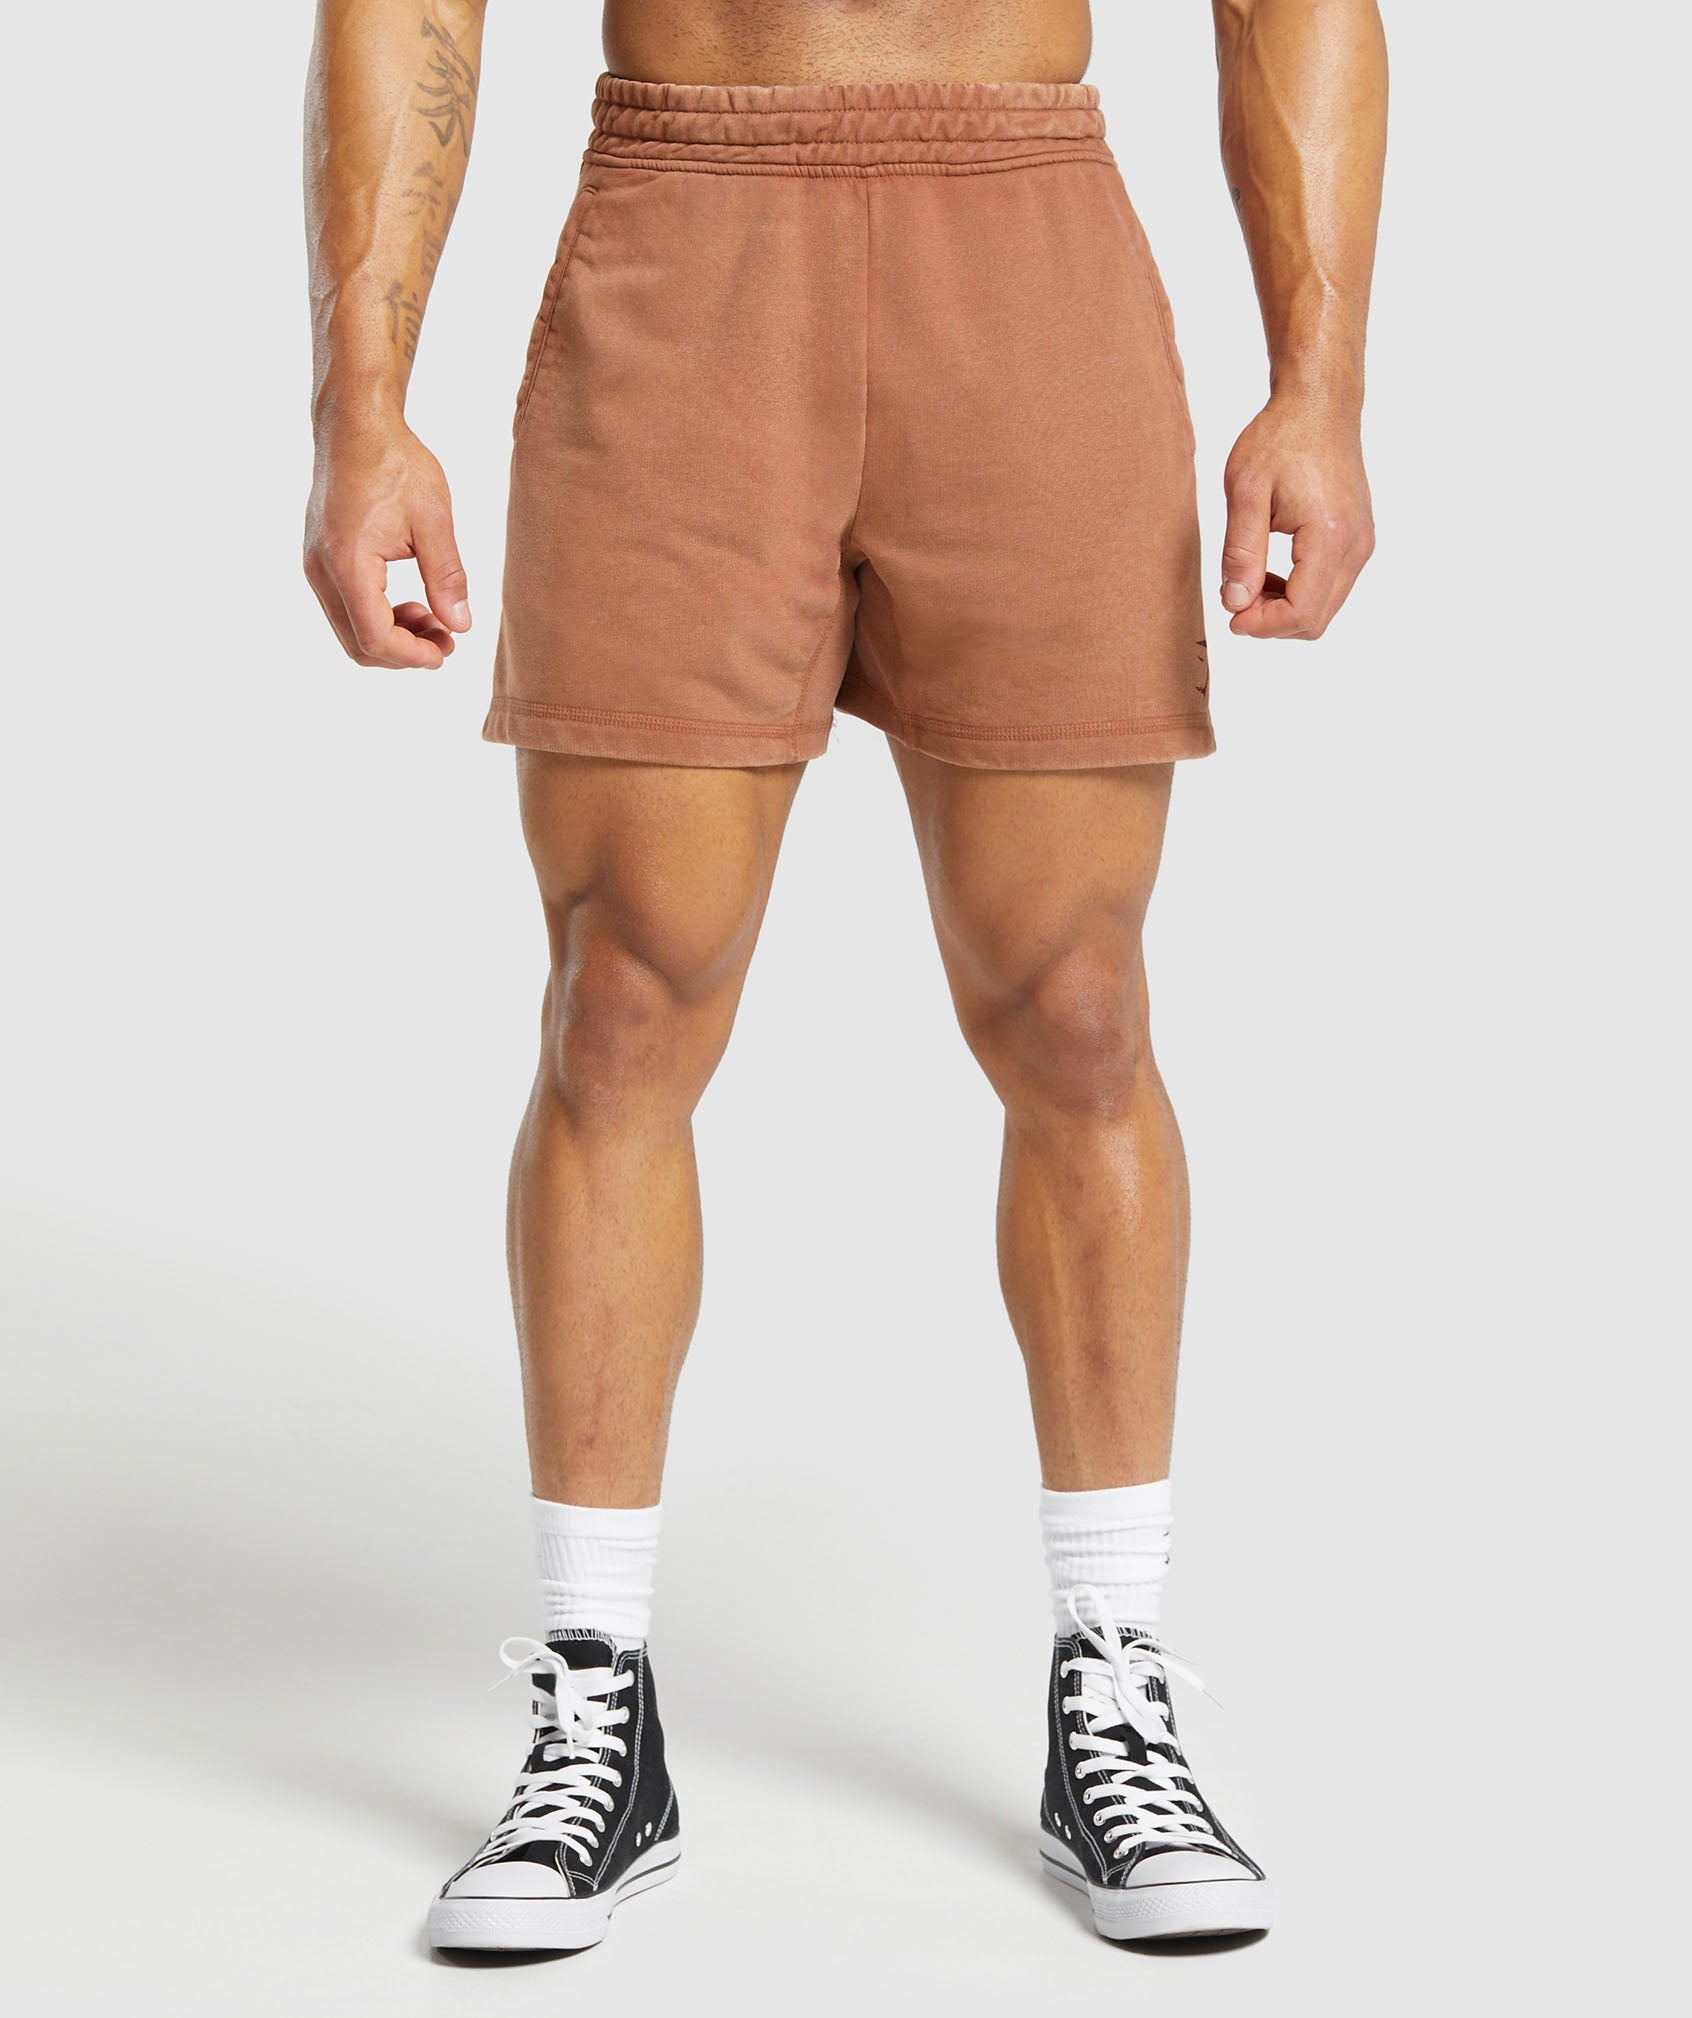 Heritage 5" Shorts in Canyon Brown